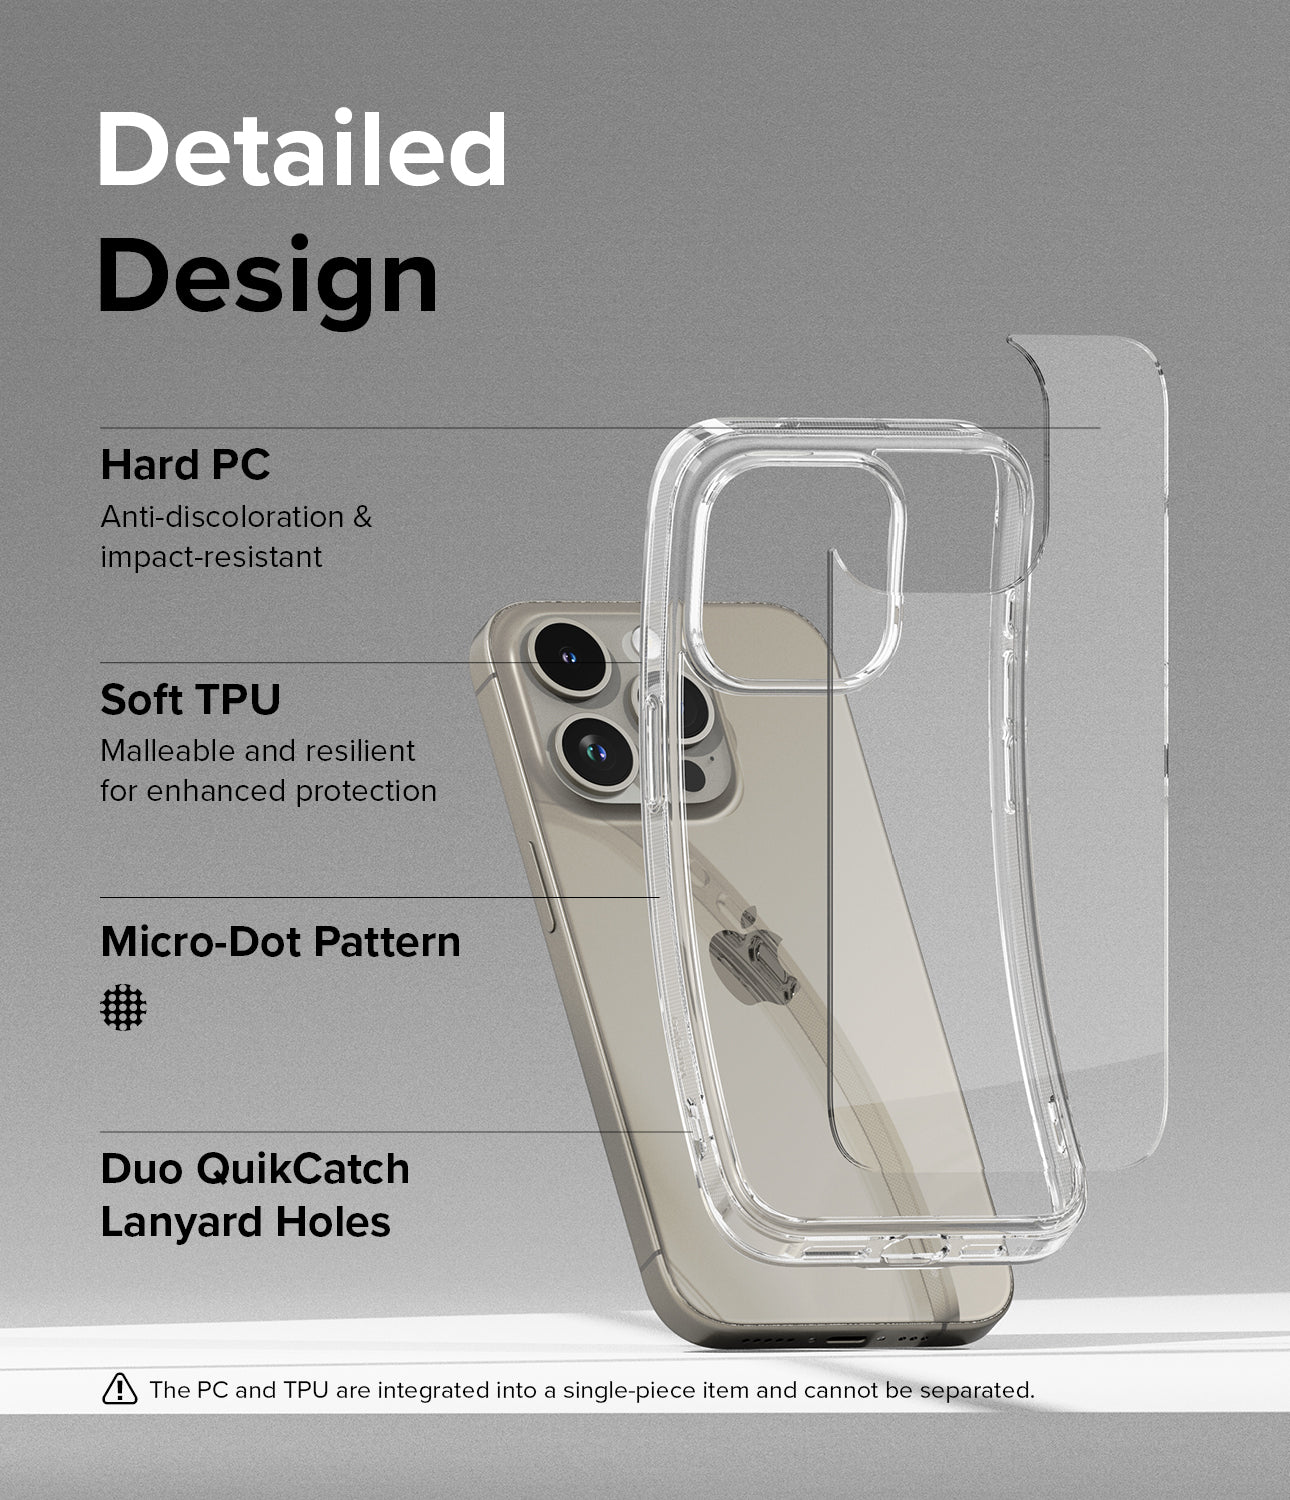 iPhone 15 Pro Max Case | Fusion Clear - Detailed Design. Anti-discoloration and impact-resistant with Hard PC. Malleable and resilient for enhanced protection with Soft TPU. Micro Dot Pattern. Duo QuikCatch Lanyard Holes